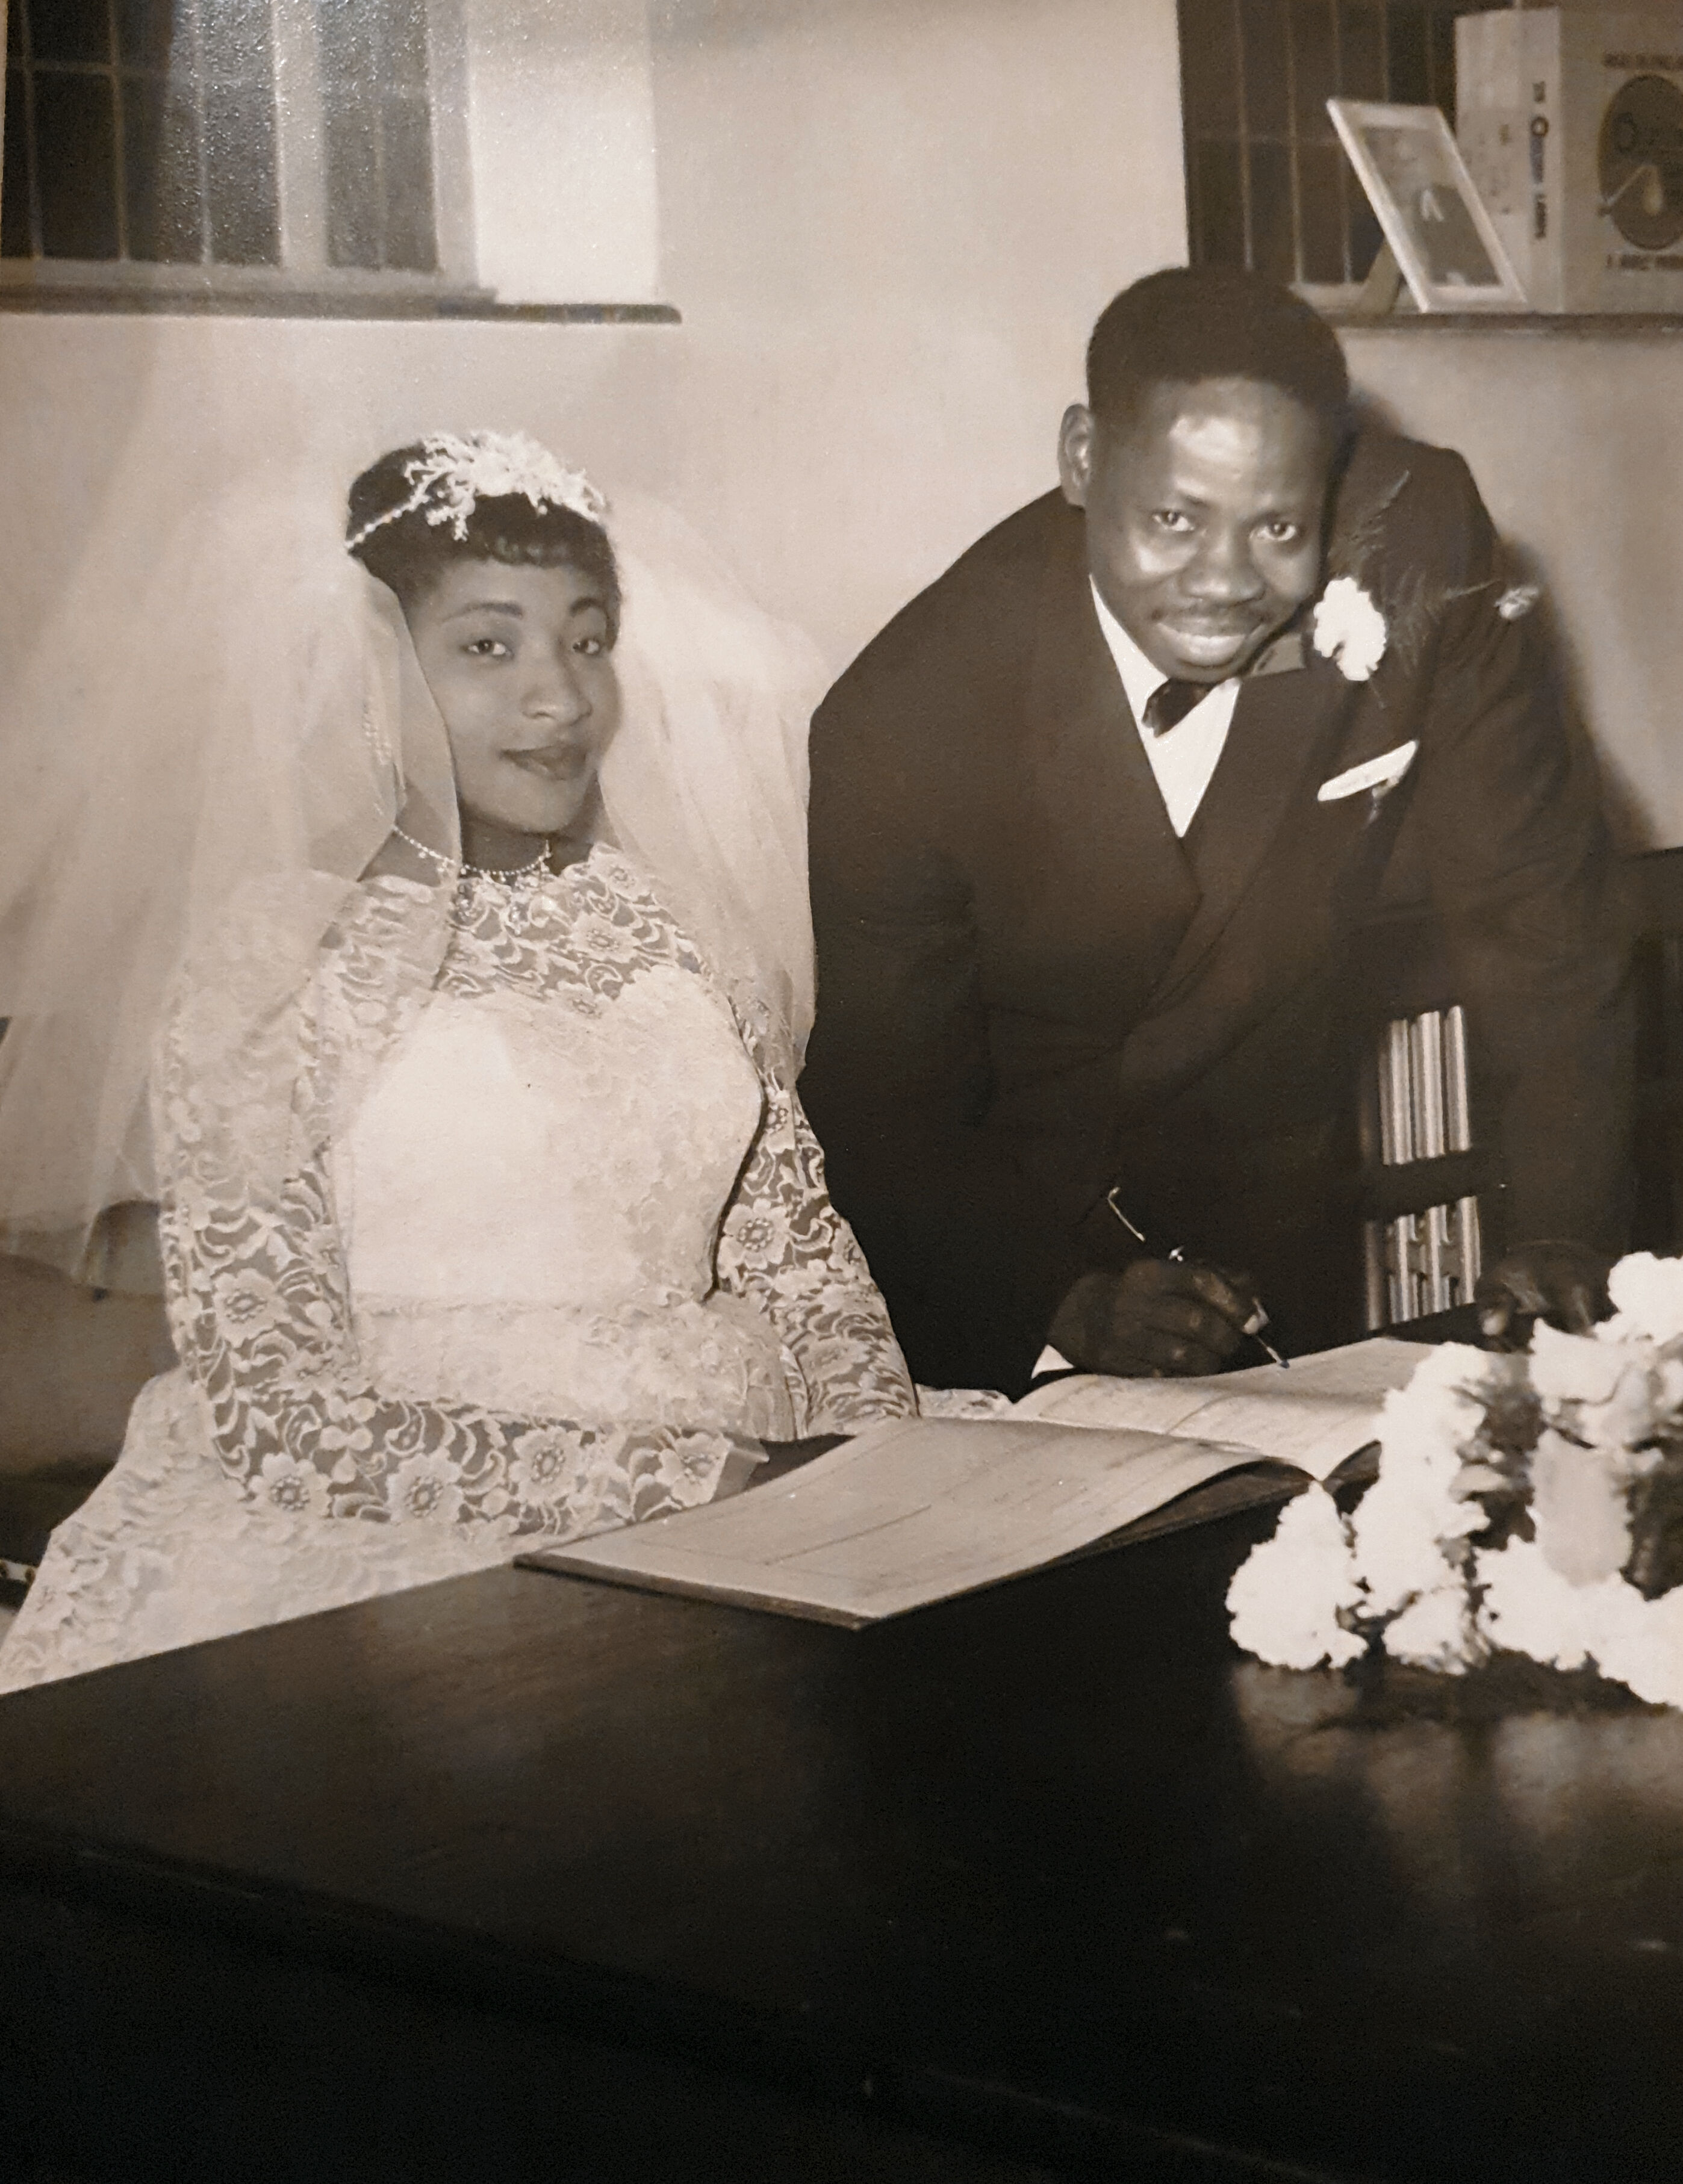 Mummy and Daddy's Wedding Day, 9th March 1963
